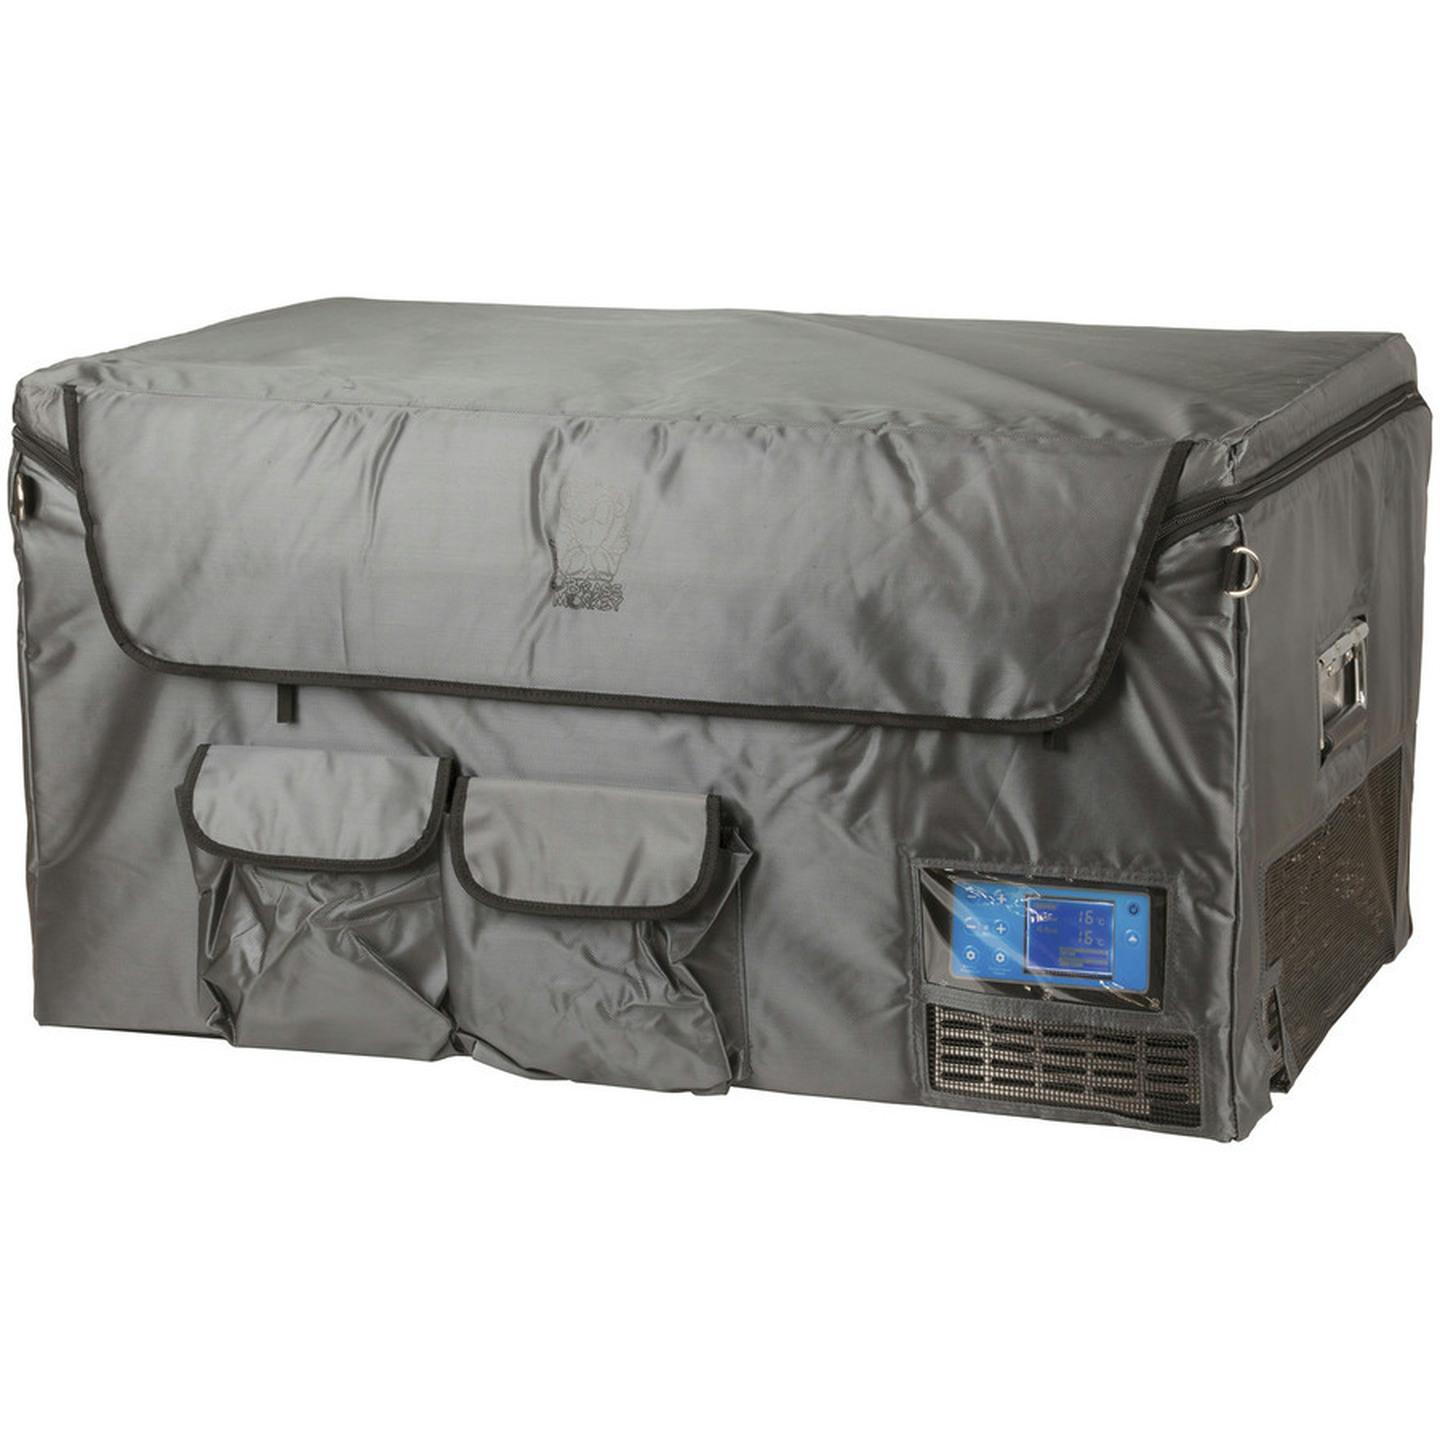 Grey Insulated Cover for 80L Brass Monkey Portable Fridge/Freezer